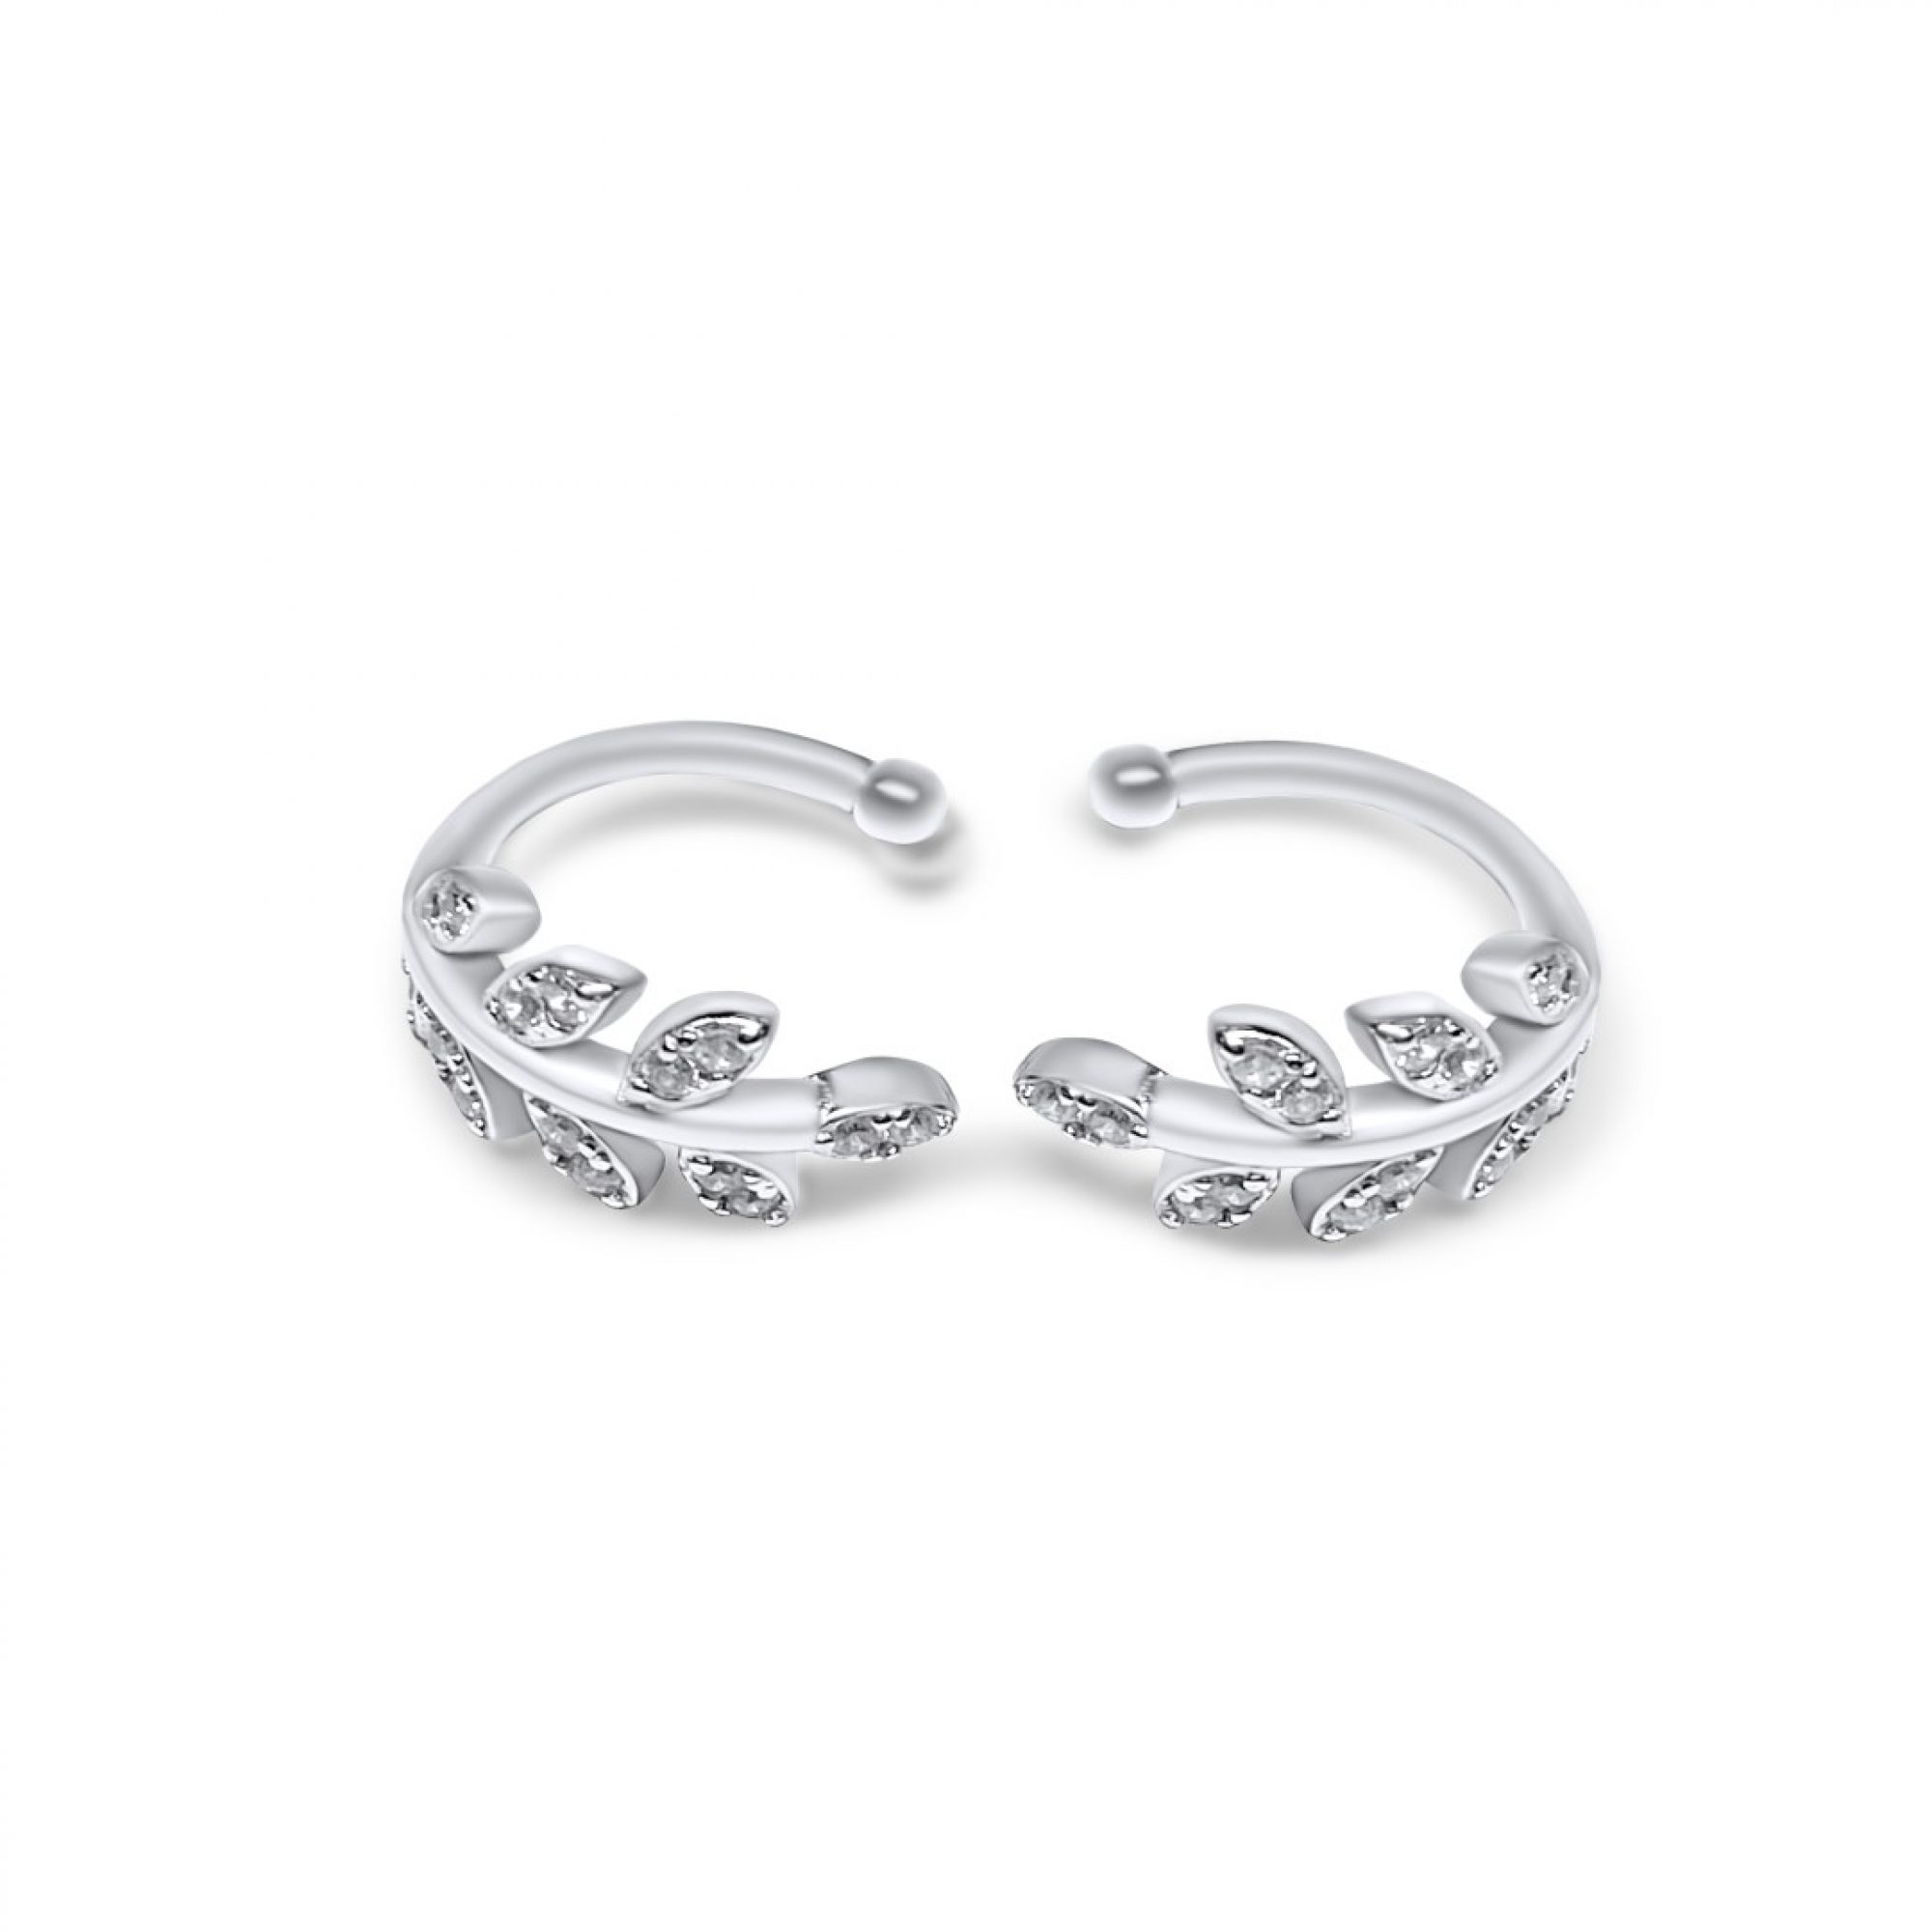 Silver olive branch ear cuffs with zircon stones